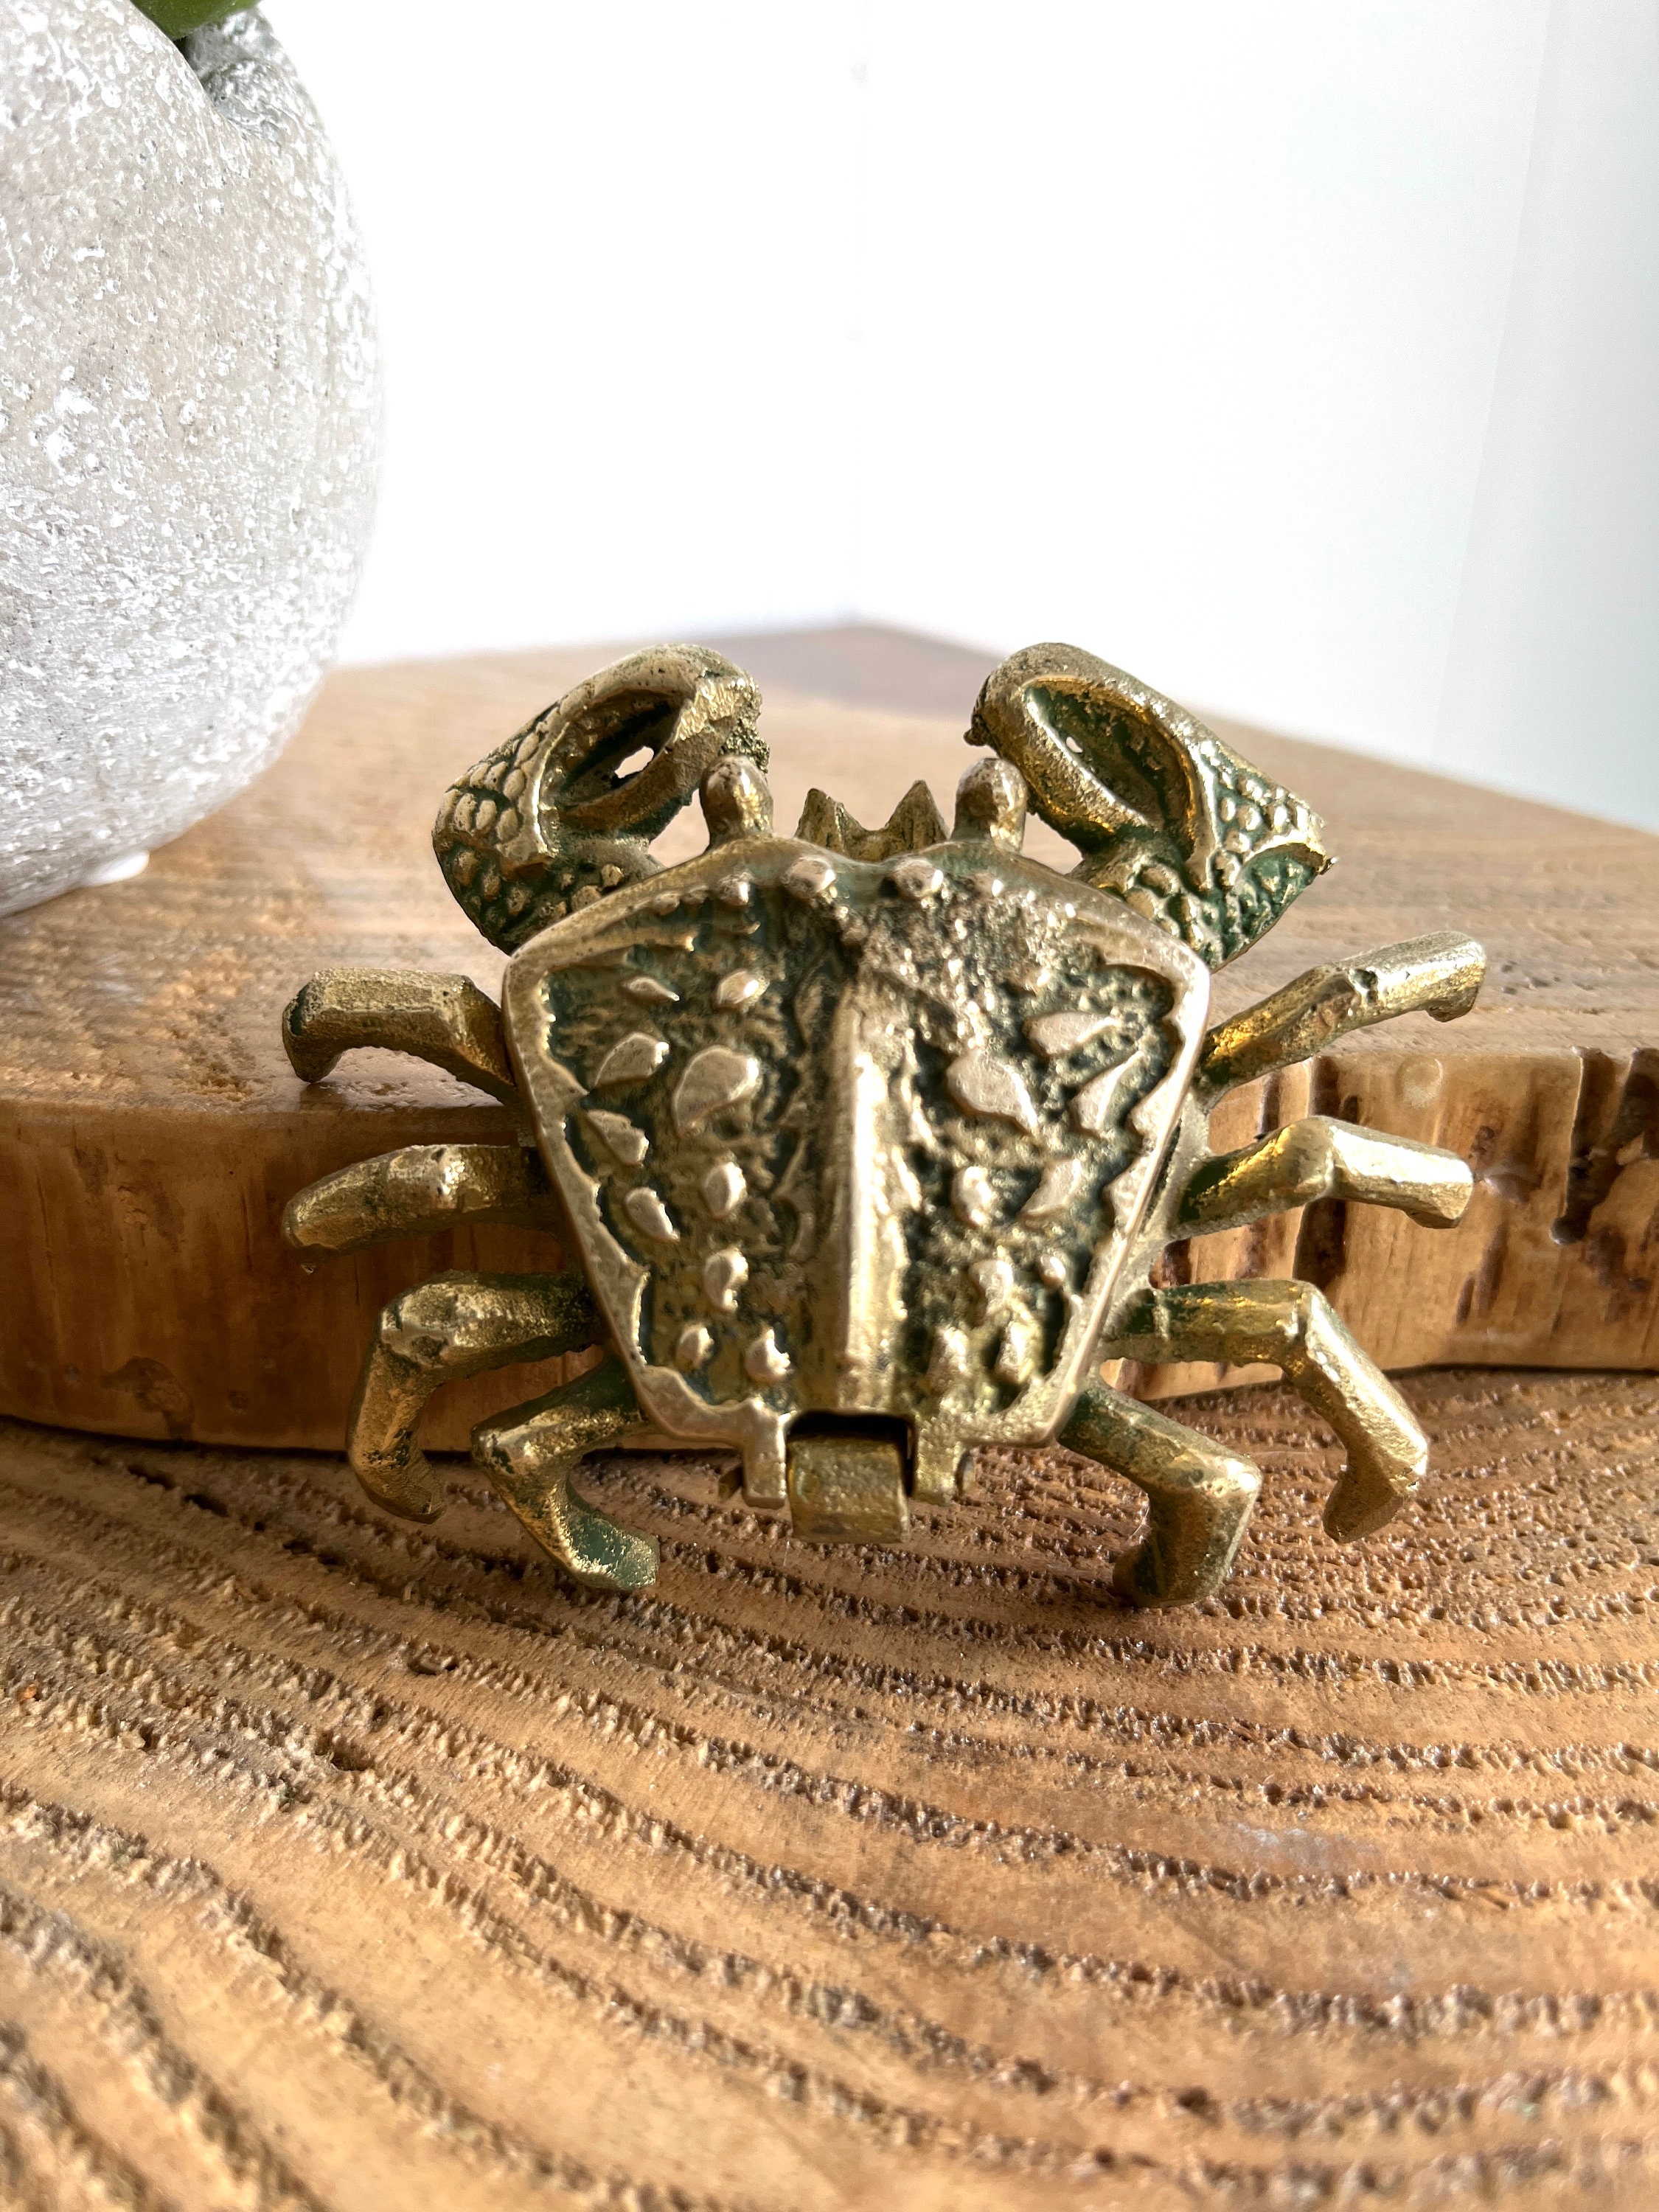 Crab Shell Dish Spoon Rest, Ring Holder, Jewelry Holders, Trinket